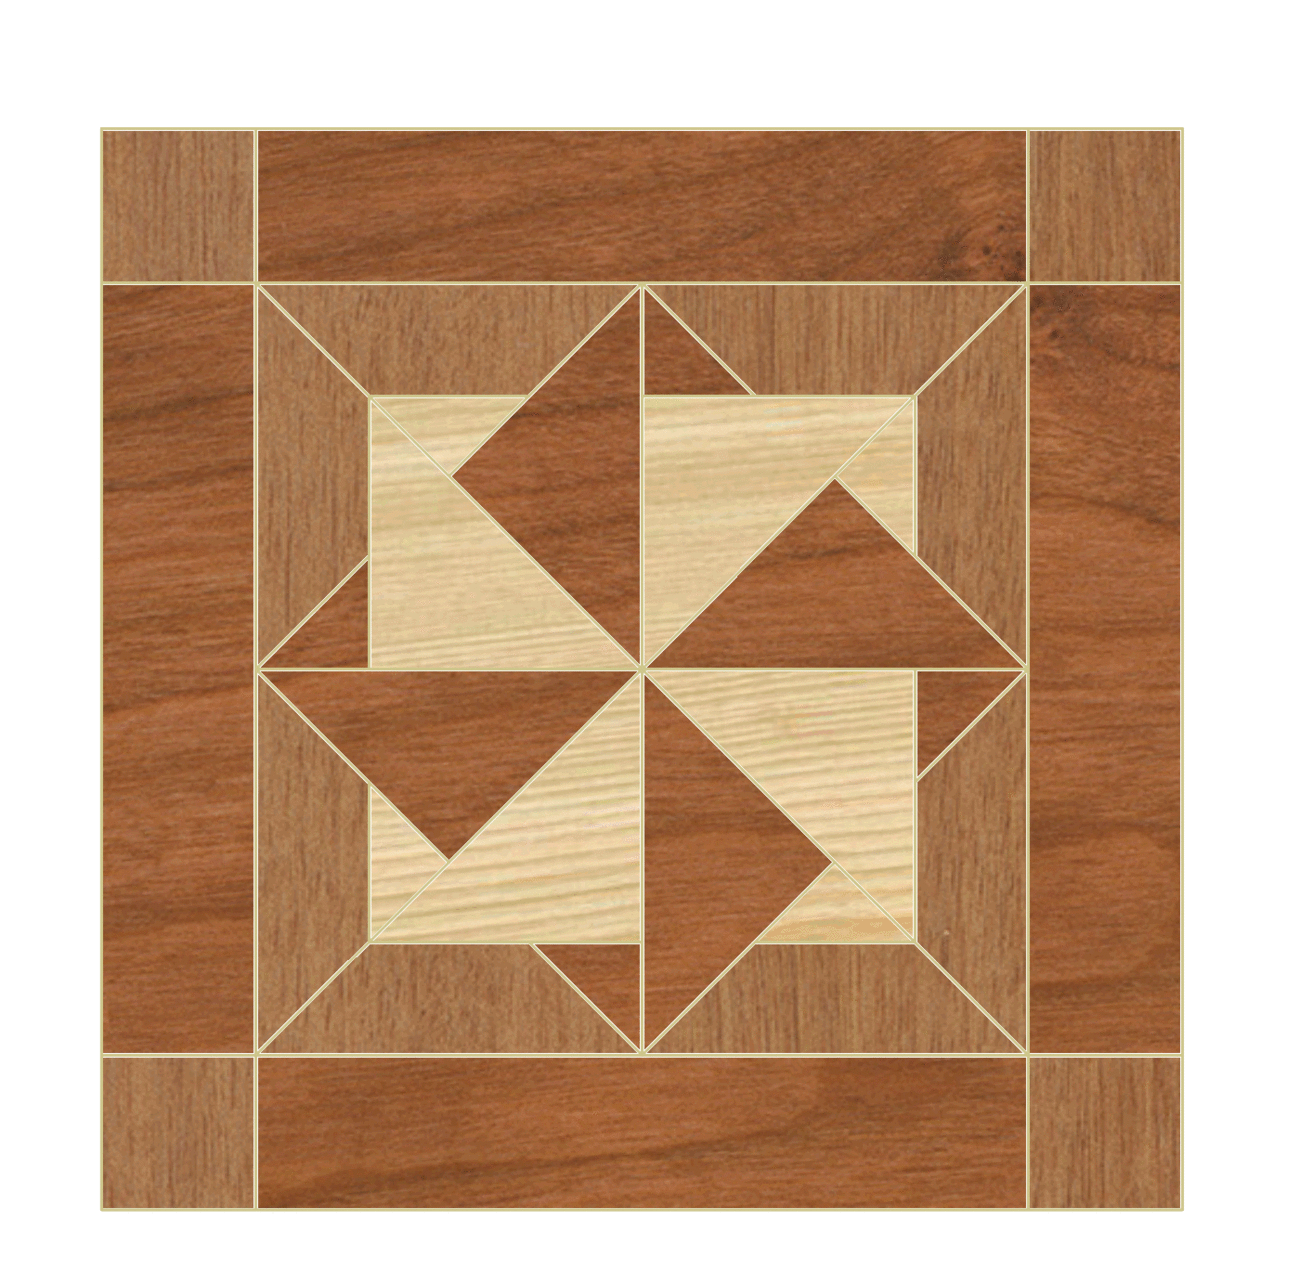 Woodworking patterns Main Image